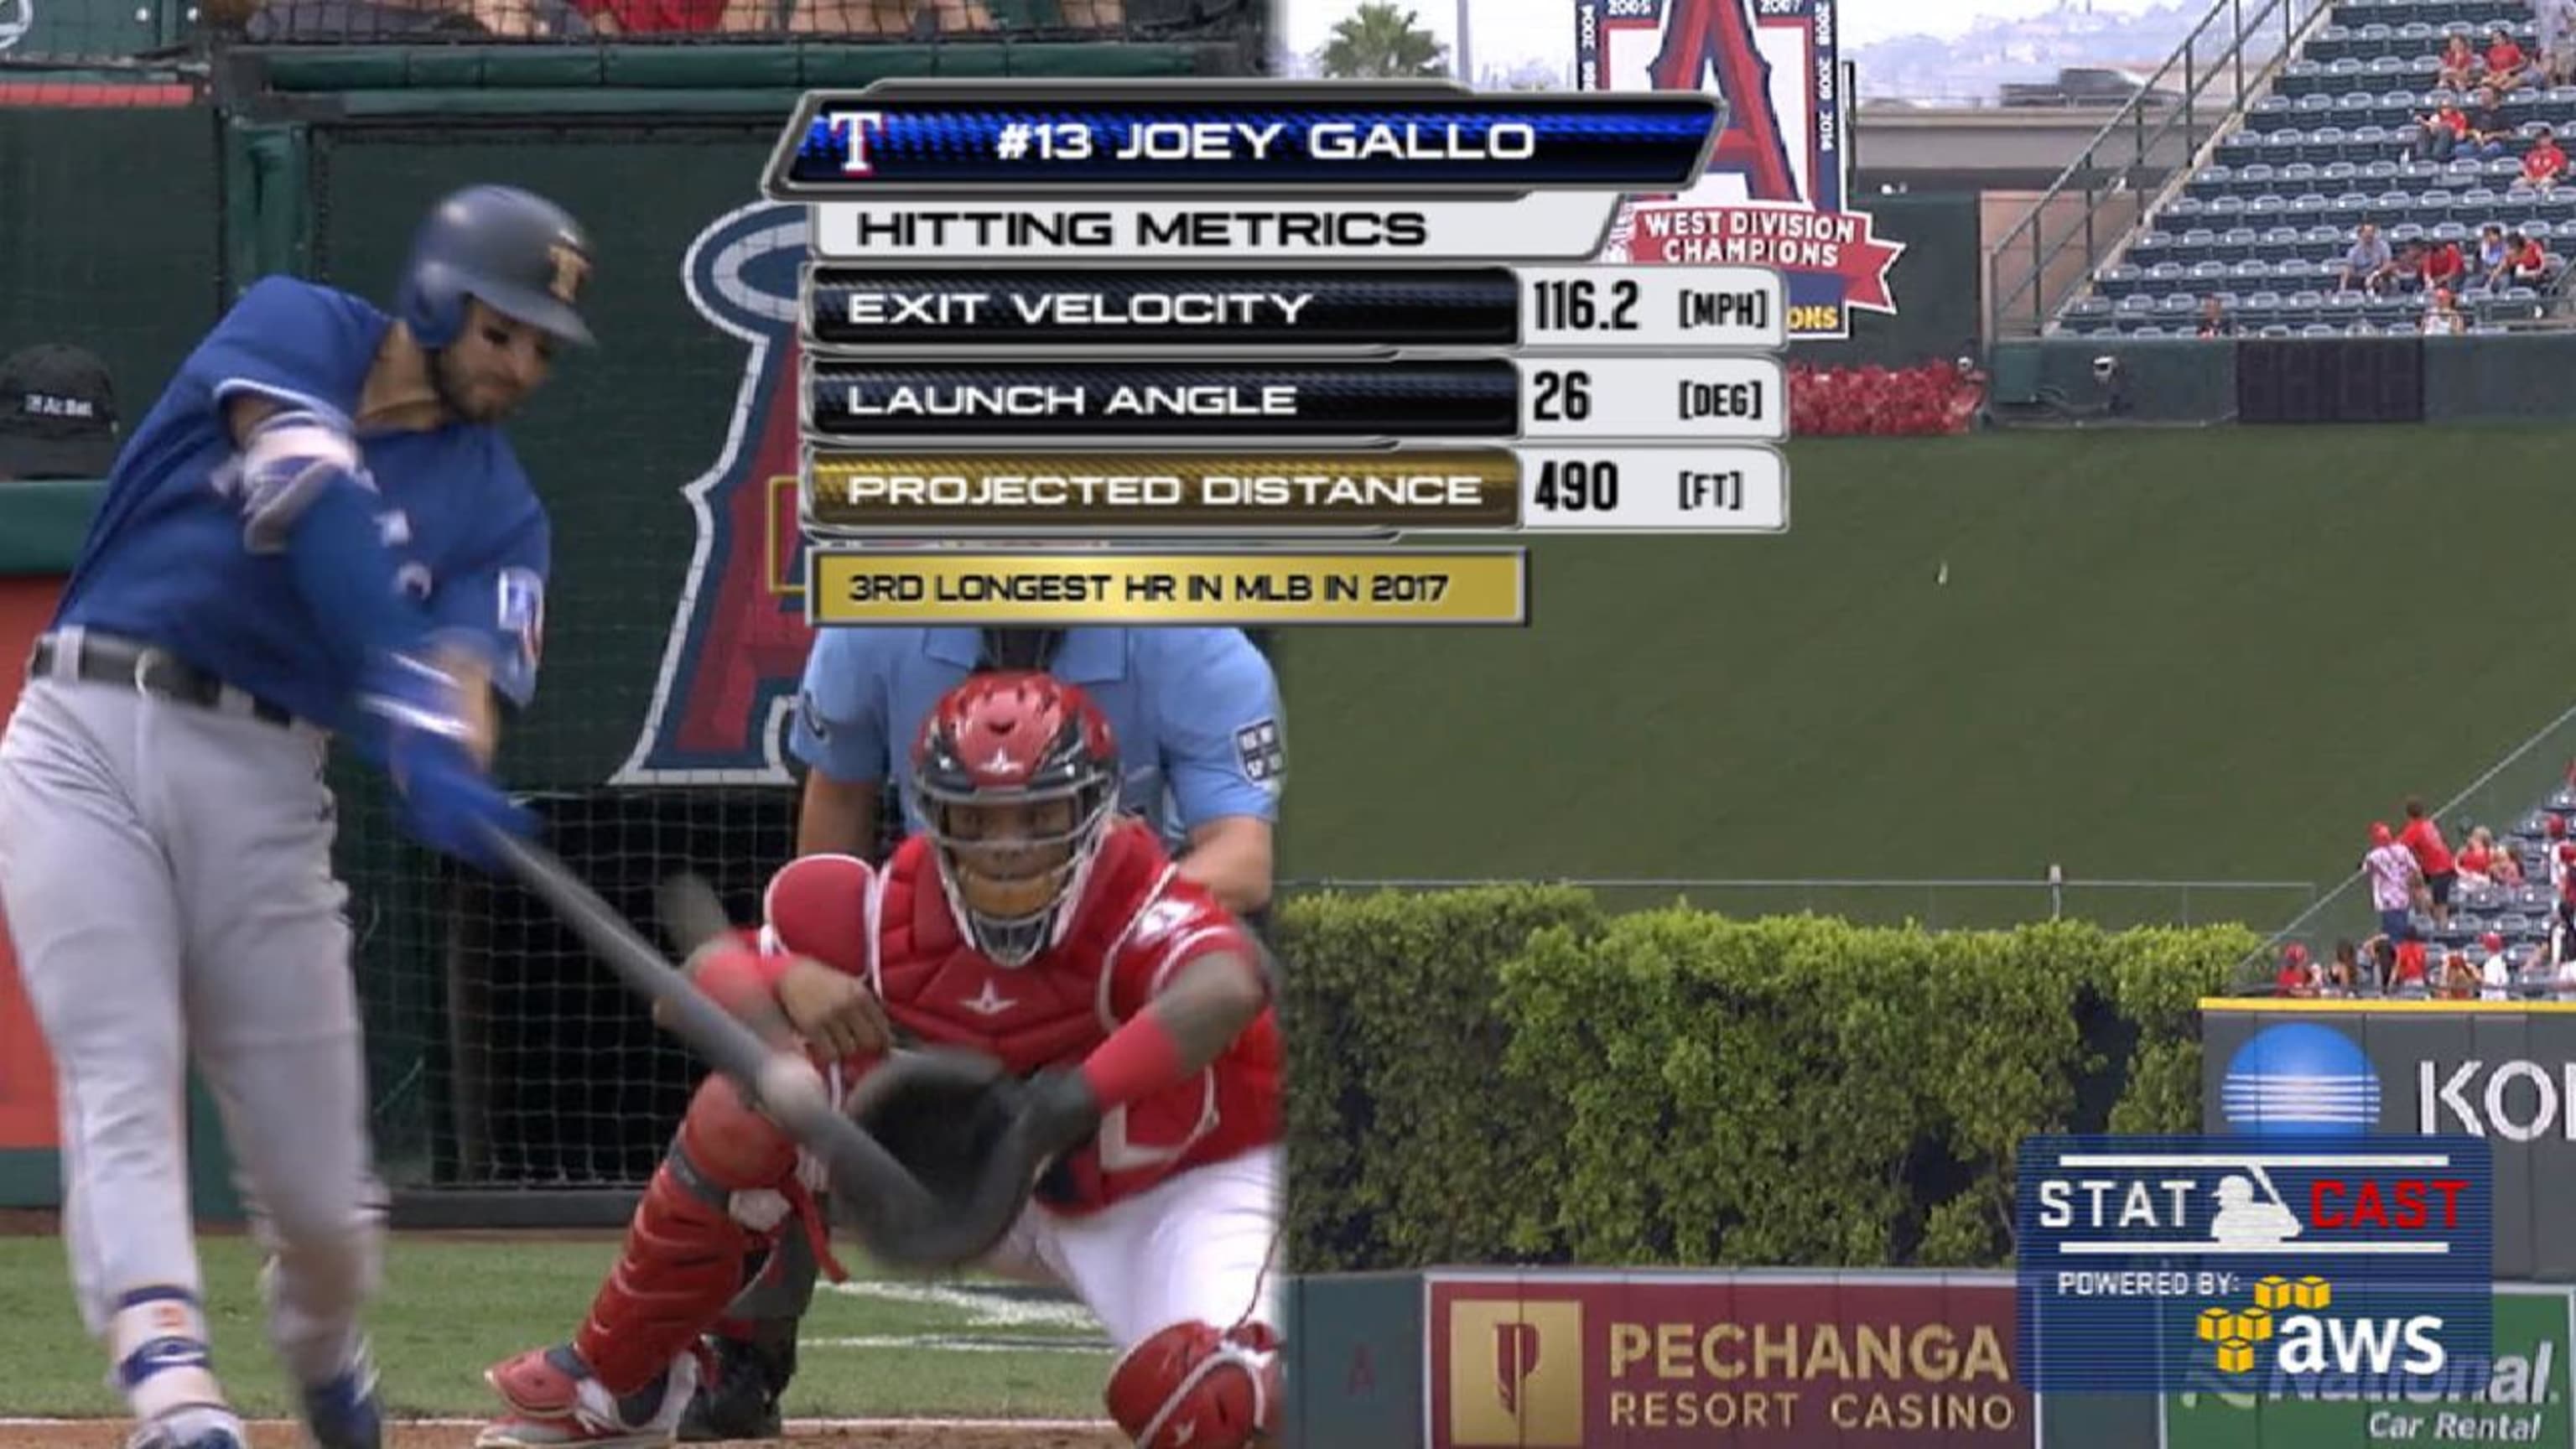 Joey Gallo bested himself with a massive 490-foot homer and the Rangers' TV  crew could only laugh